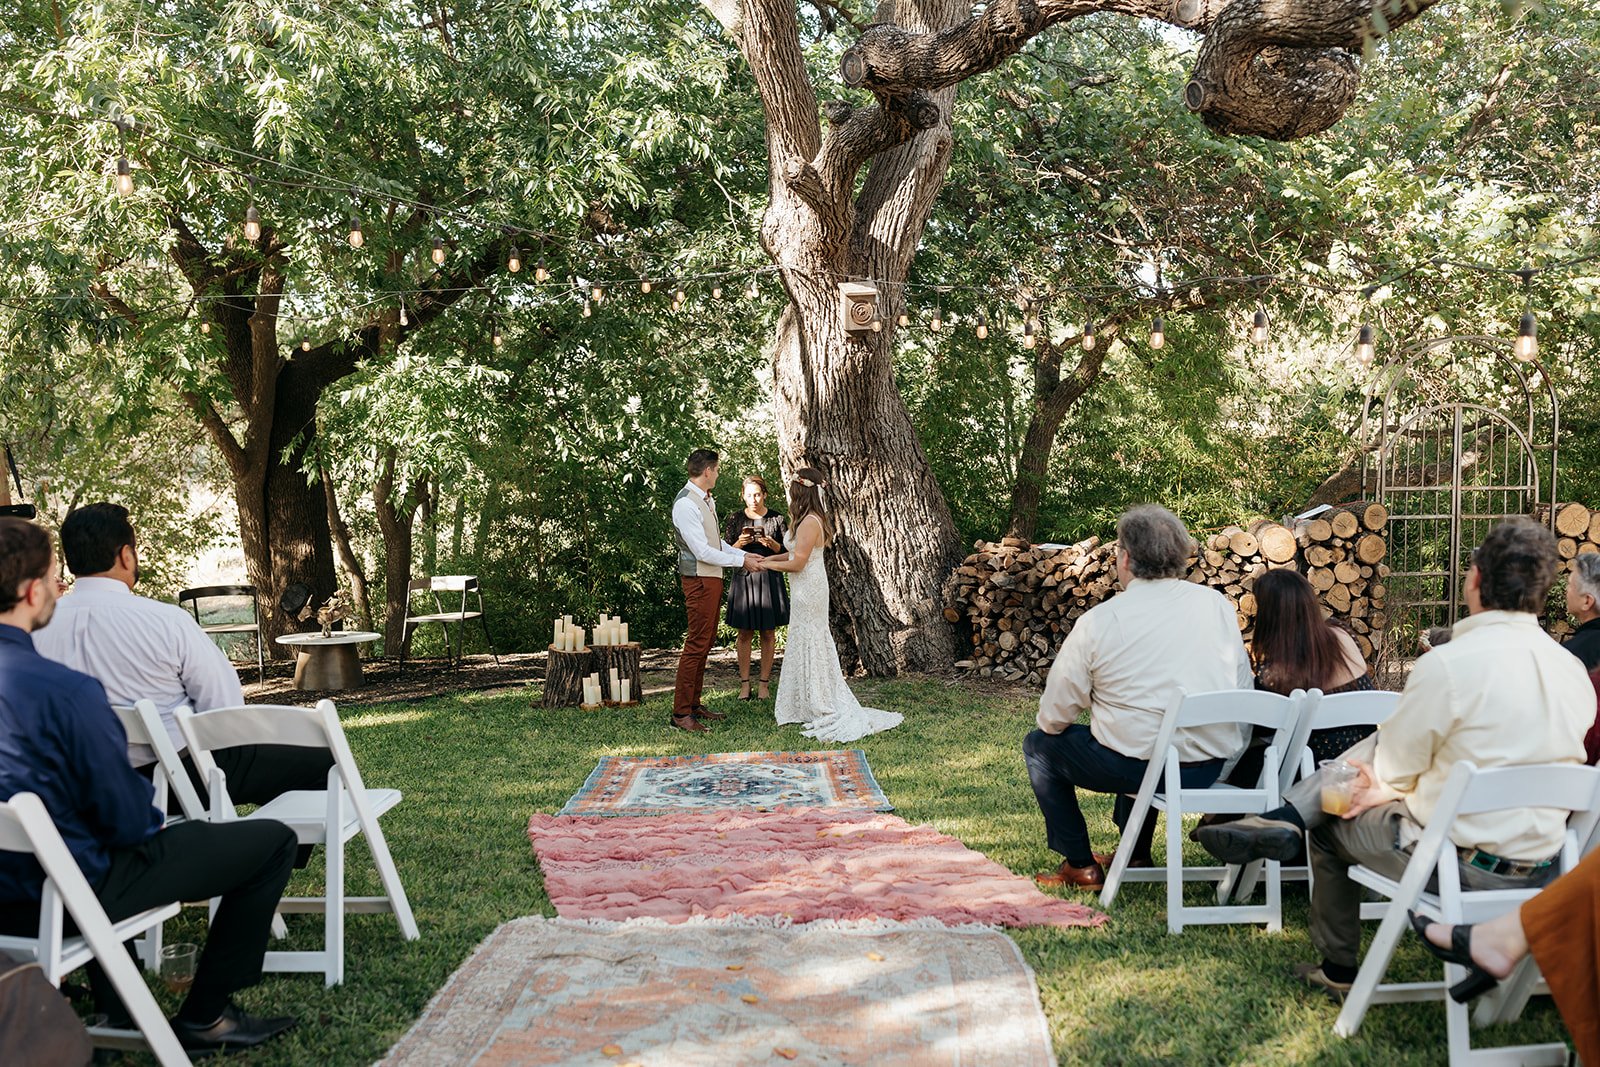 The shade of the trees make the perfect spot for their intimate wedding in Fredericksburg